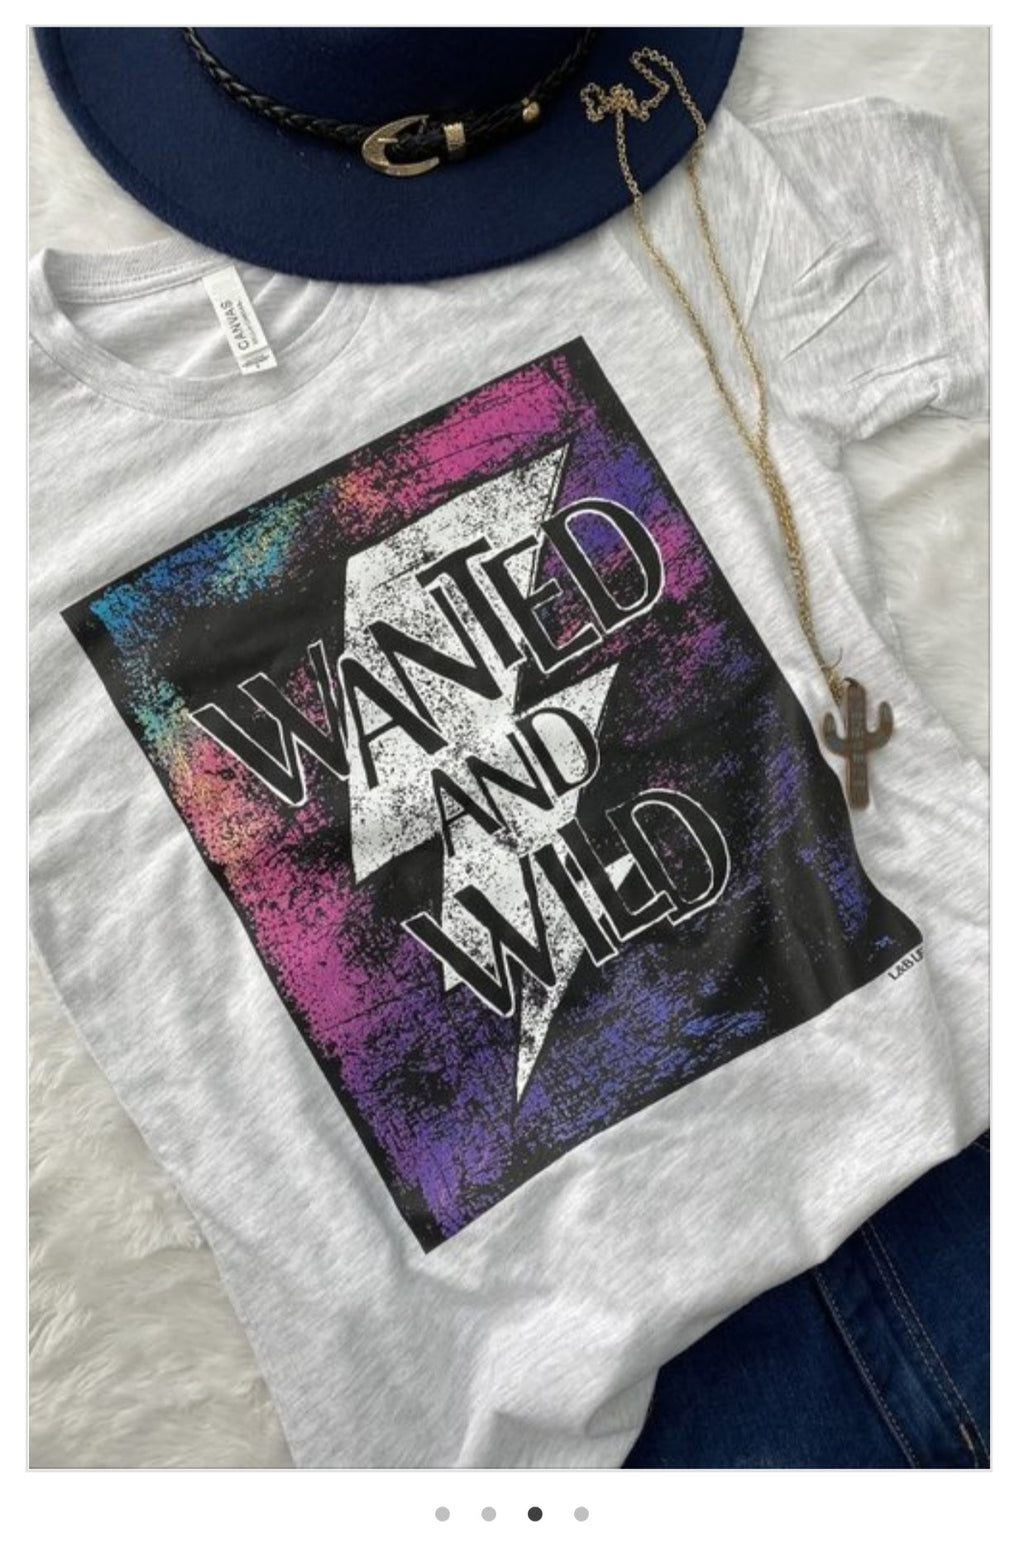 Wanted & Wild Graphic Tee